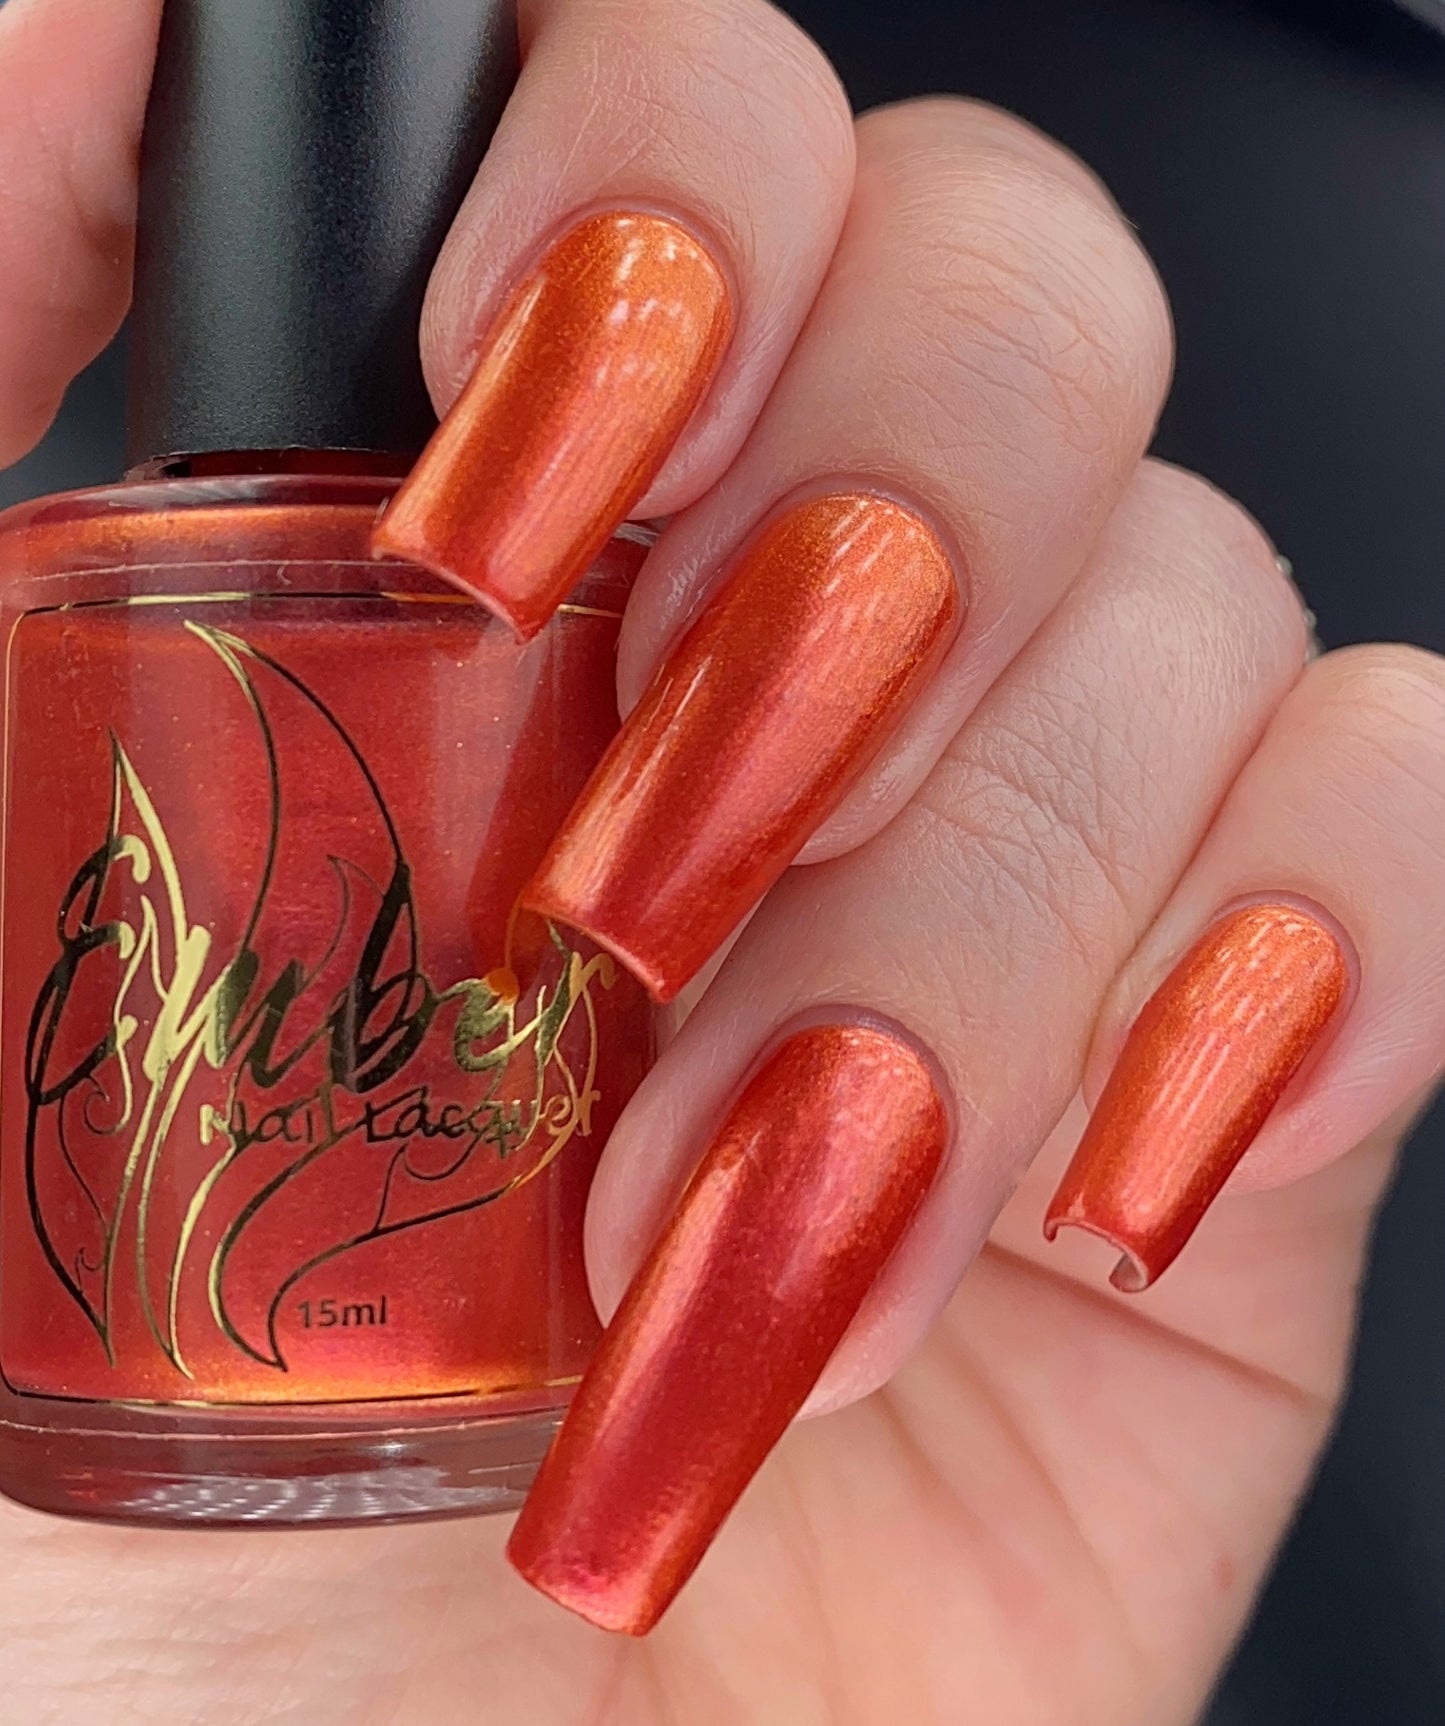 stunning effect of Flys Open coral pink and gold duotone on long nails